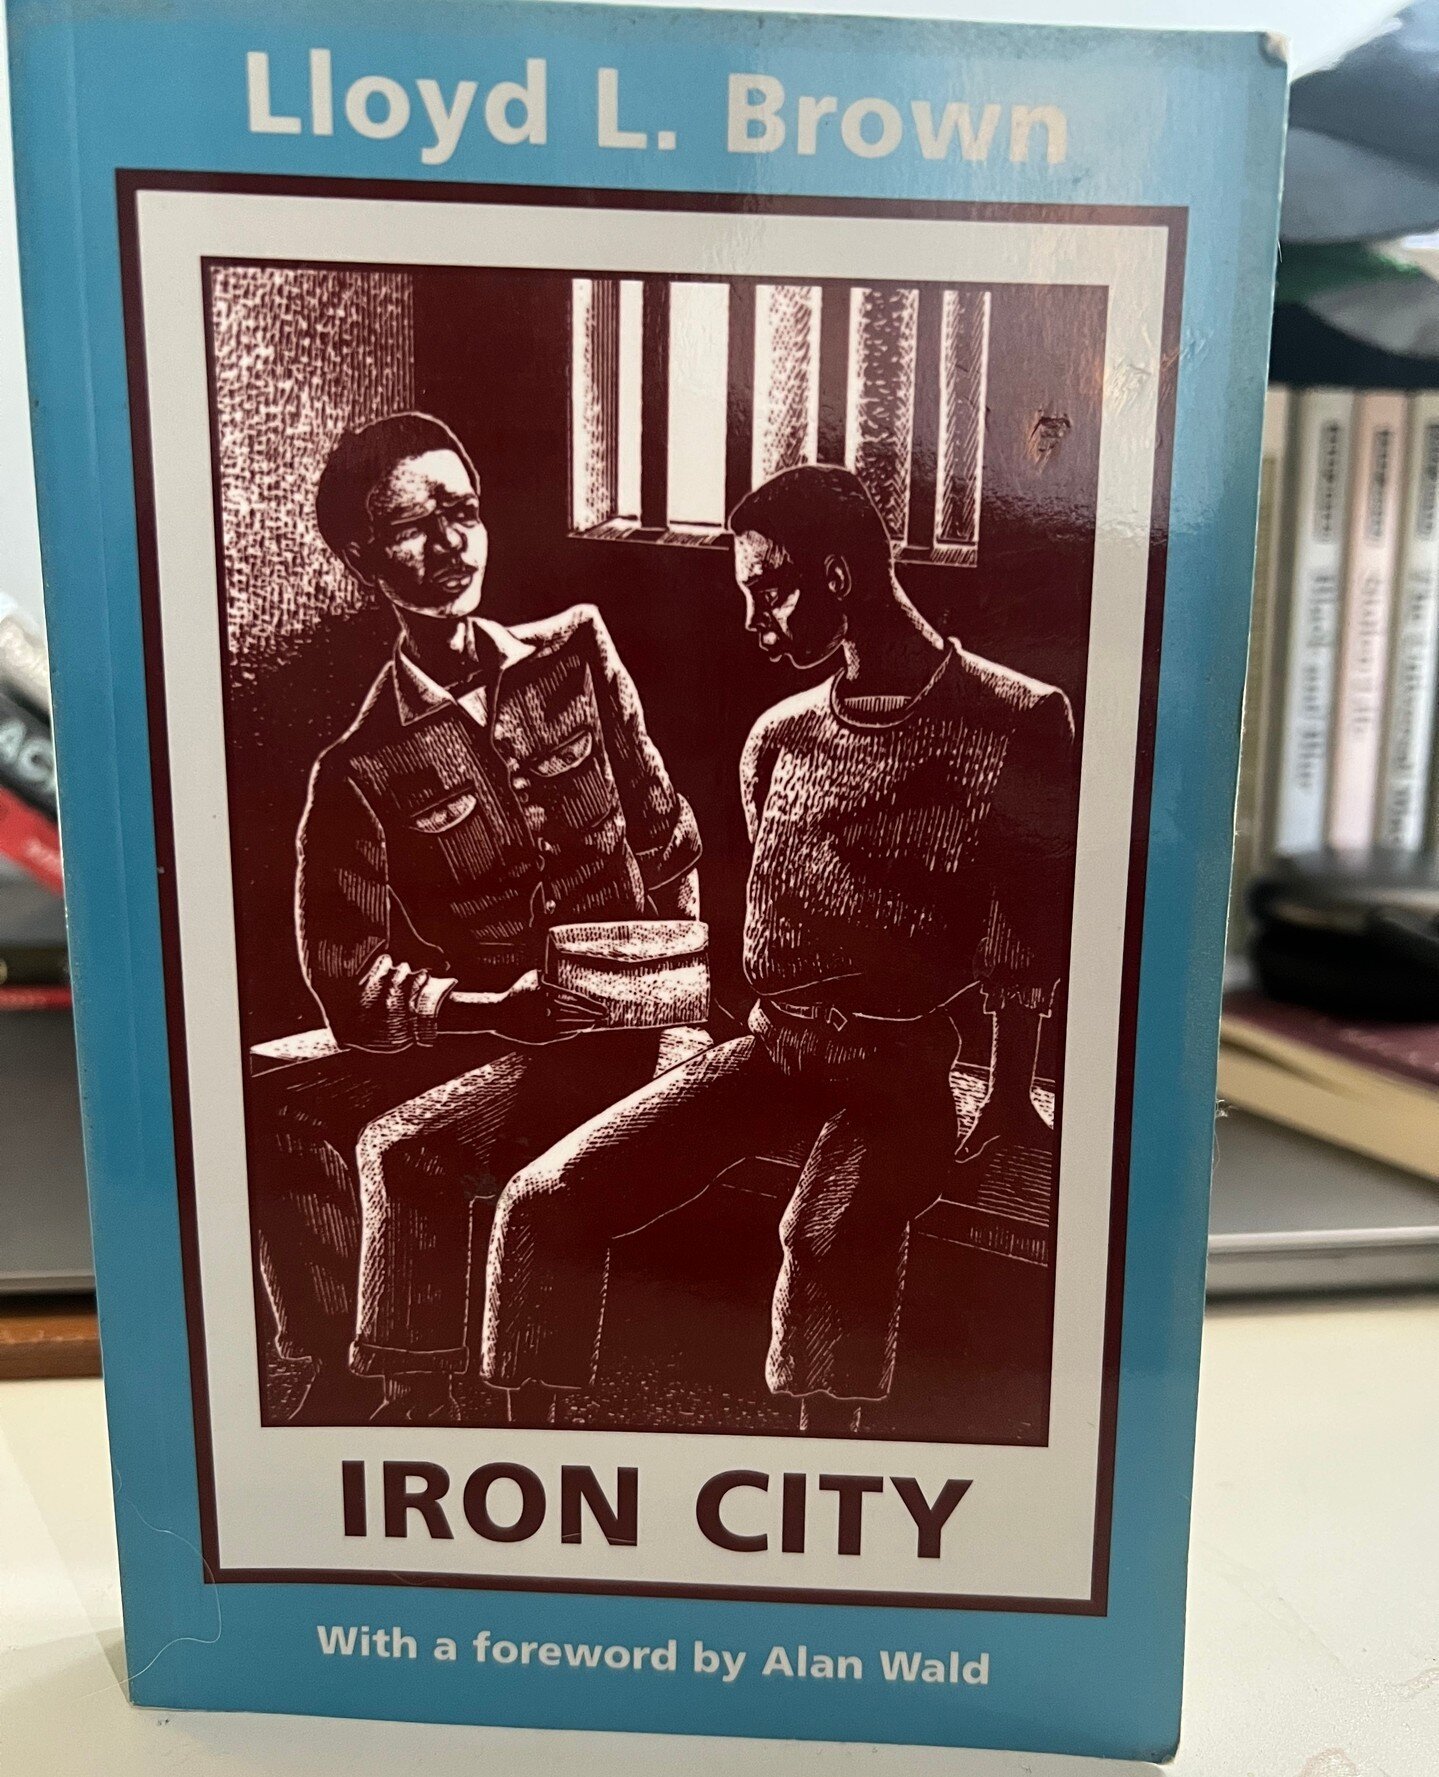 Iron City intertwines themes of carcerality, prison, race, and blackness, as it challenges societal norms and sparks important conversations about human and social realities. ⁠
⁠
[Read a full description of this book at the PAGES Trg Bookshop link in